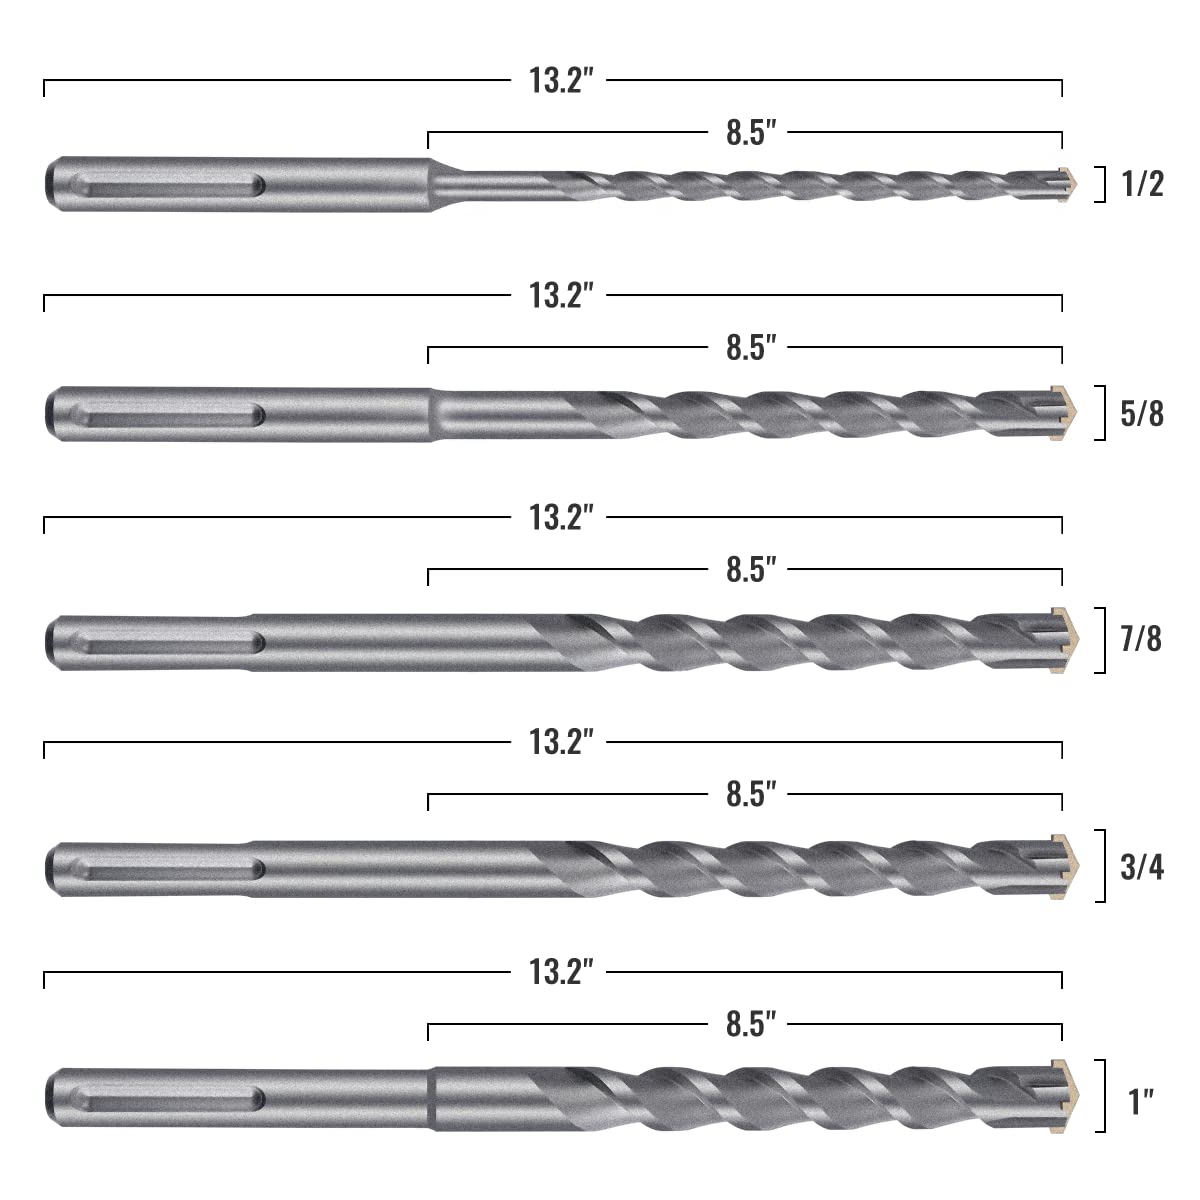 Owl Tools SDS Max Masonry Drill Bit Set (Carbide Tipped - 5 Piece Set) 13" Length in The Following Sizes: 1/2", 5/8", 3/4", 7/8", and 1"